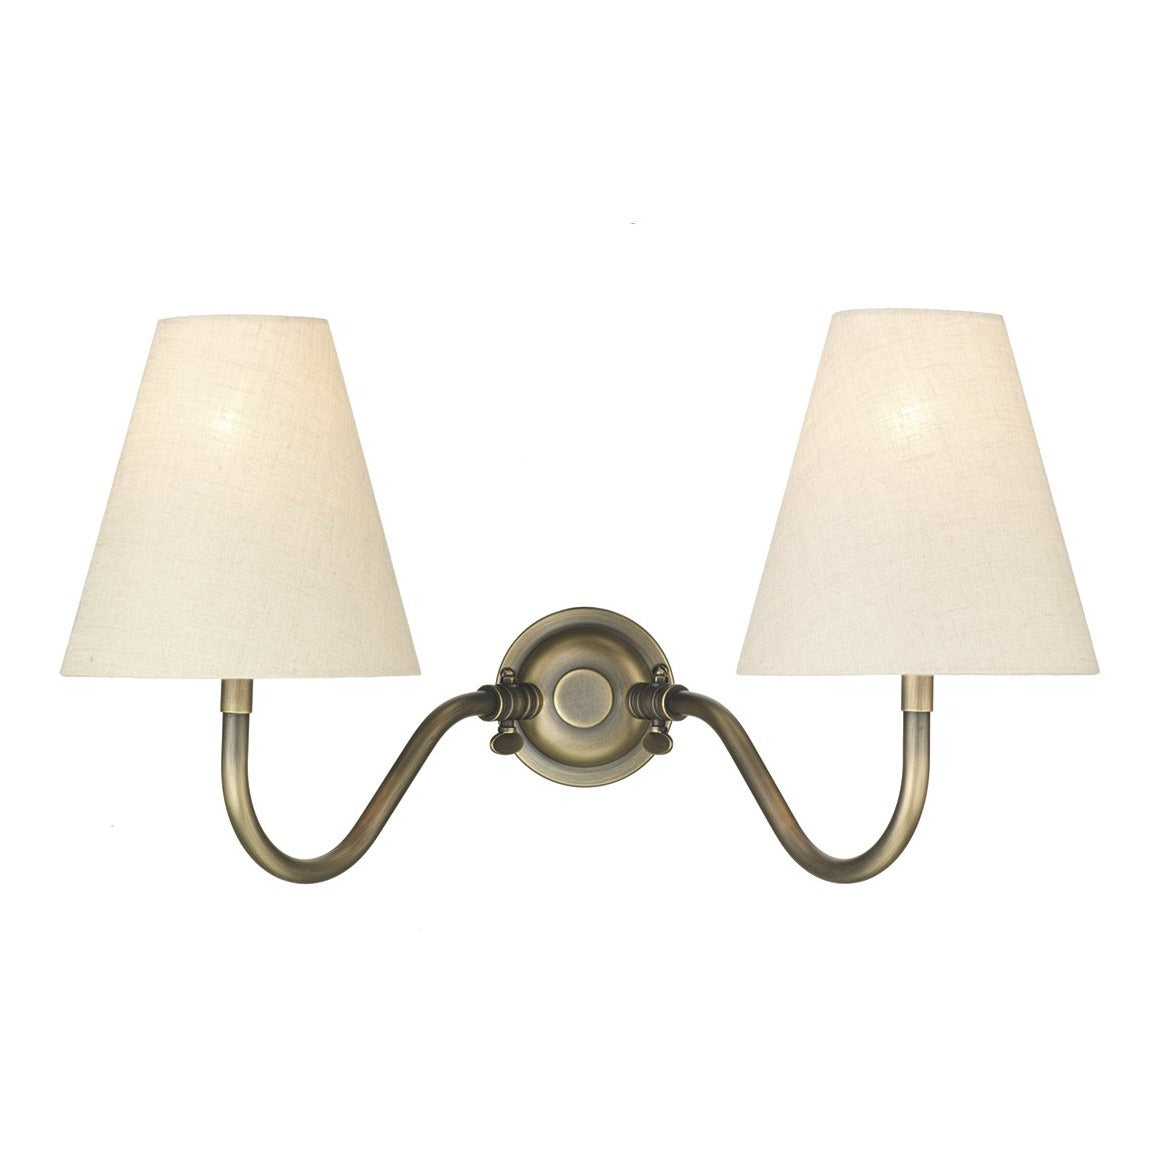 David Hunt Lighting HIcks wall light antique brass HIC0975 shown with cream linen shade sold as the base only shades to be ordered additionally